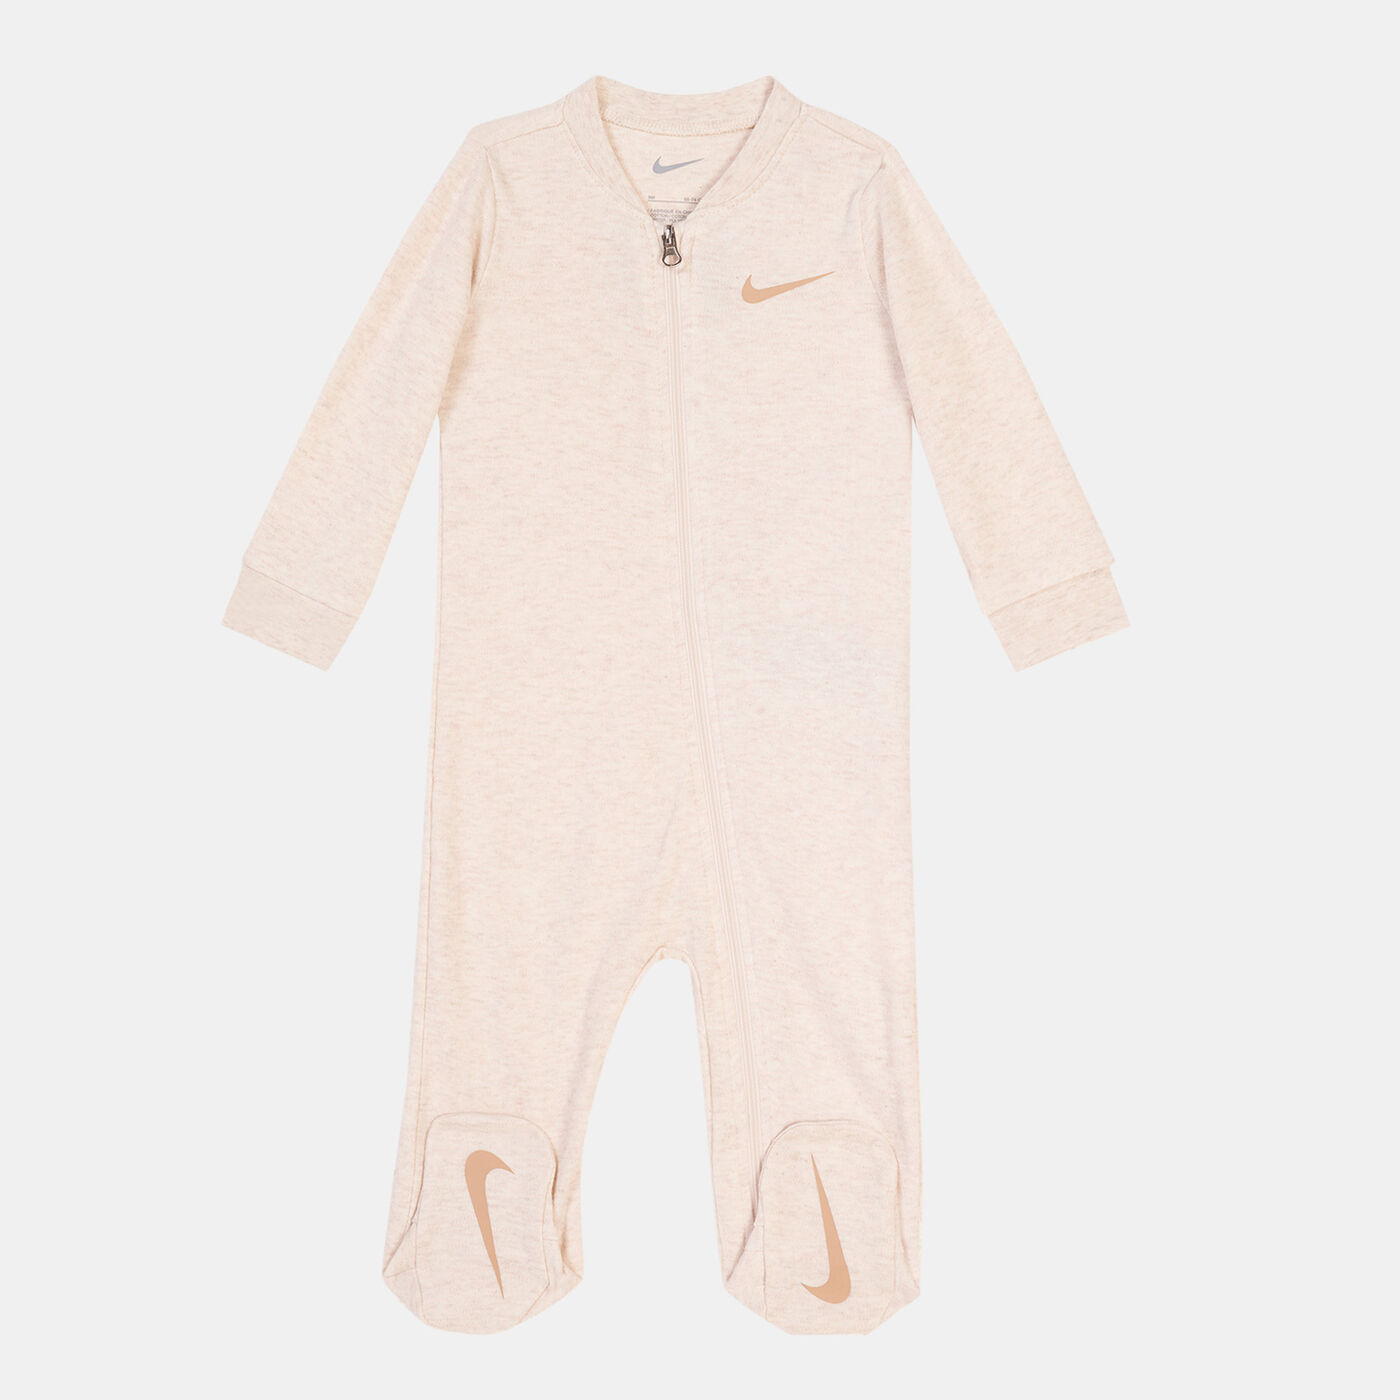 Kids' Essentials Footed Coverall